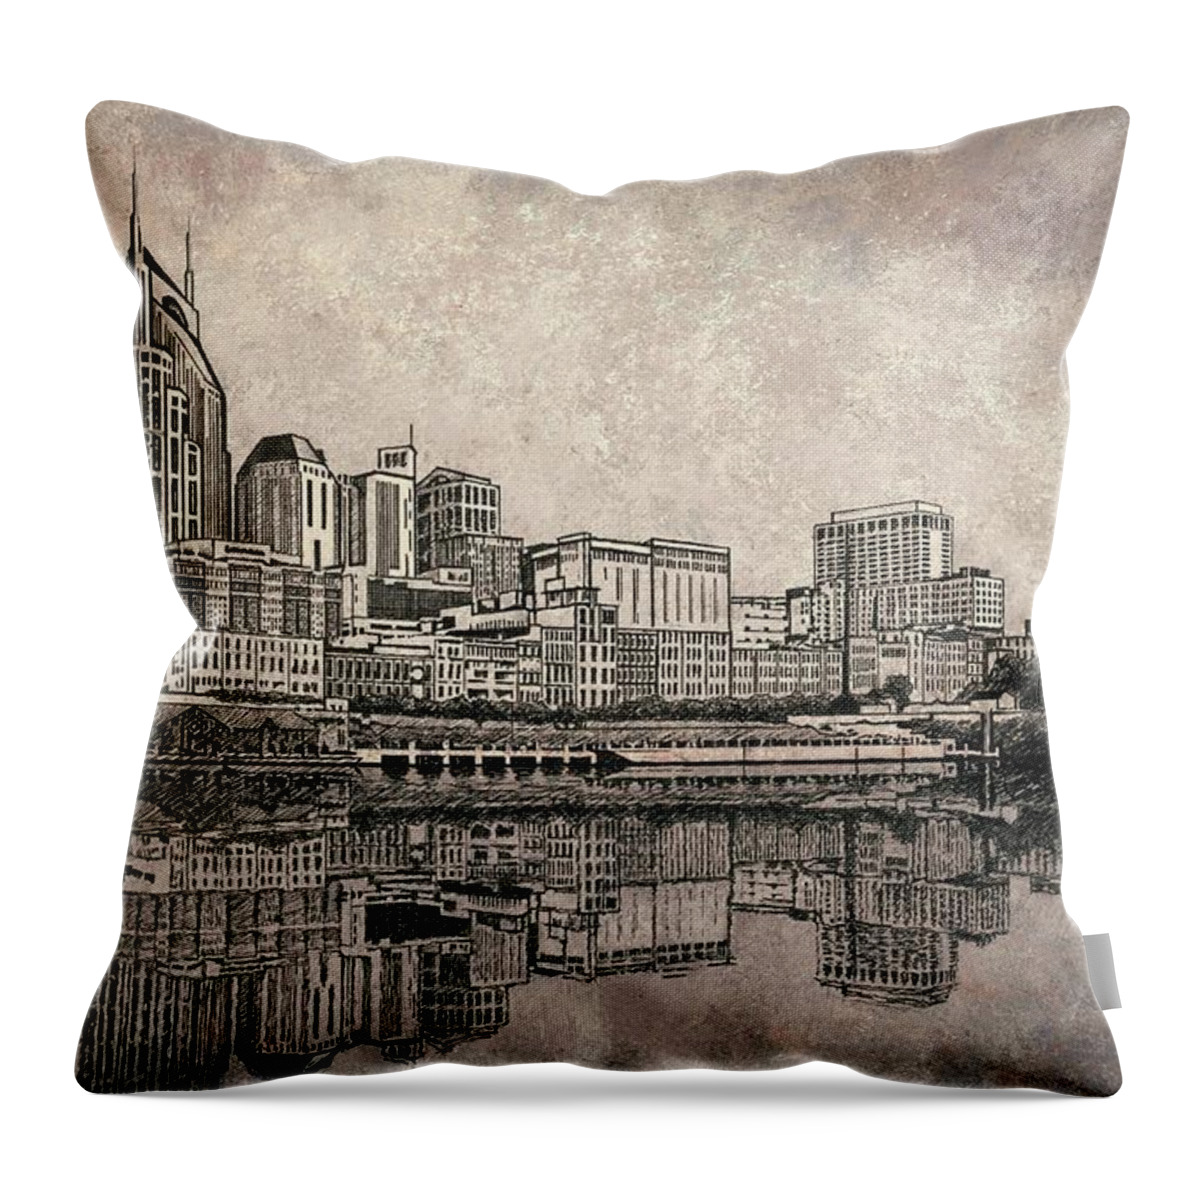 Nashville Skyline Art Throw Pillow featuring the painting Nashville Skyline Mixed Media painting by Janet King